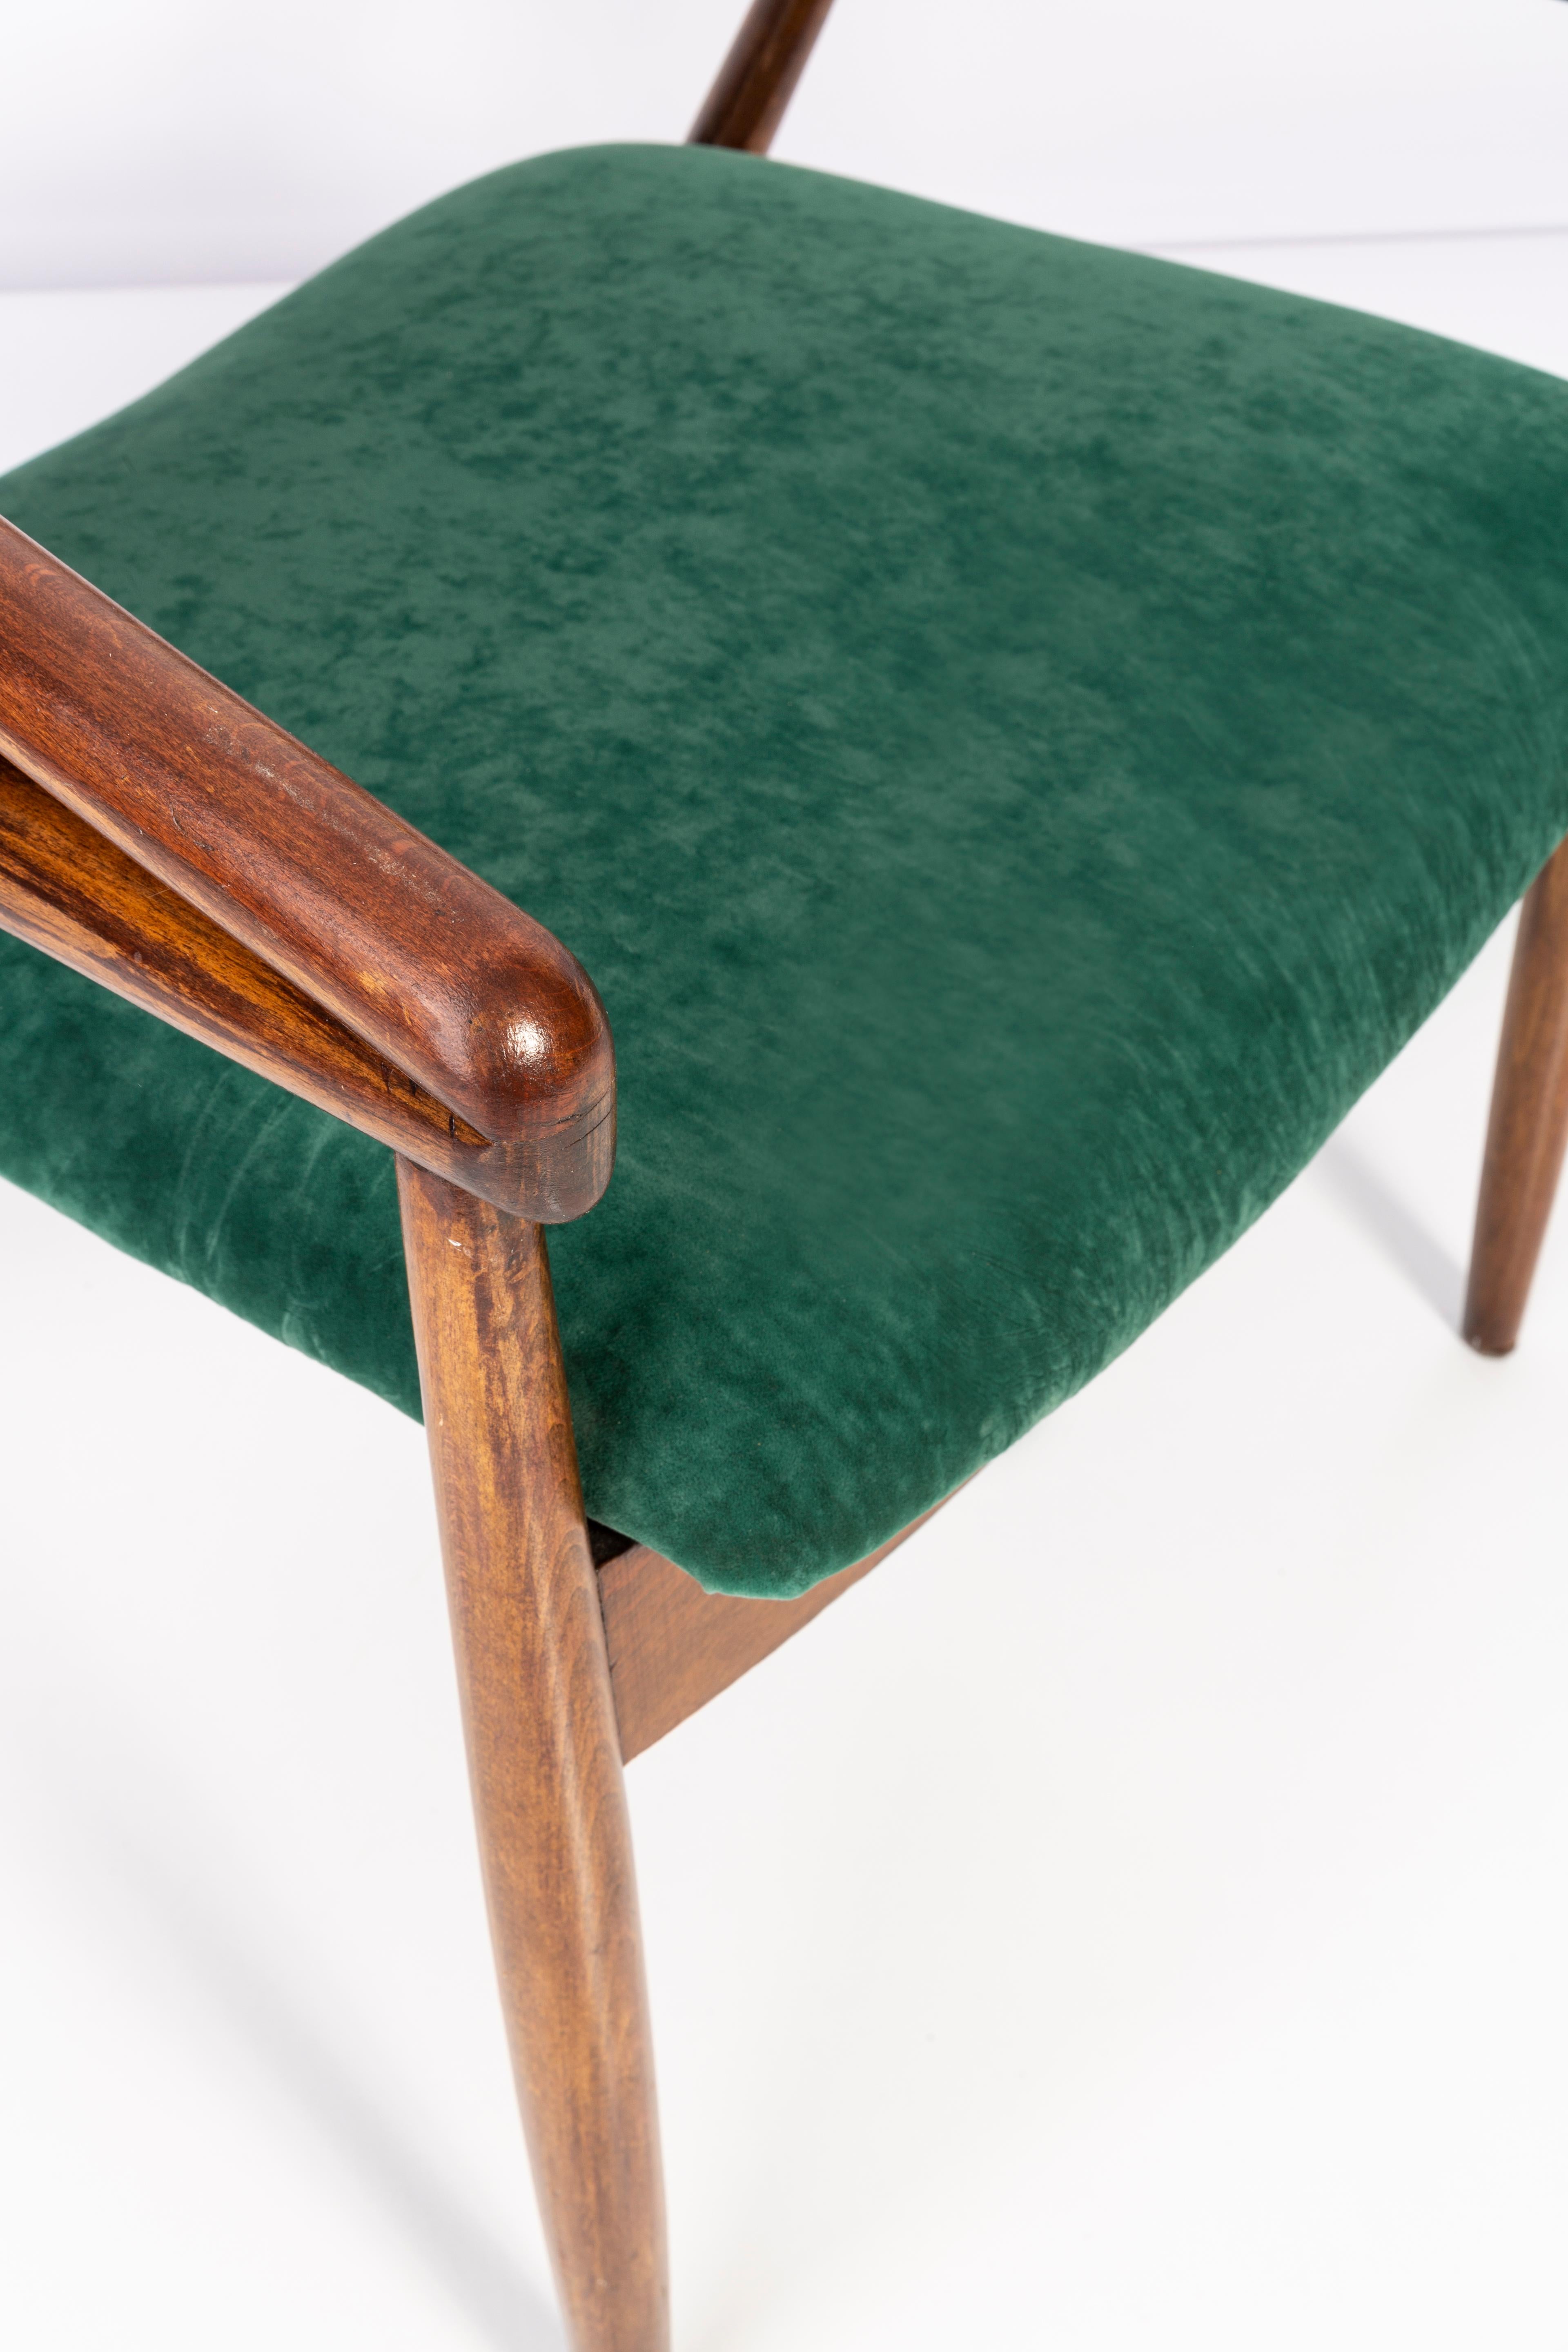 Polish Set of Two James Mont Bent Beech Armchairs, Dark Green, B-3300 Type, 1960s For Sale